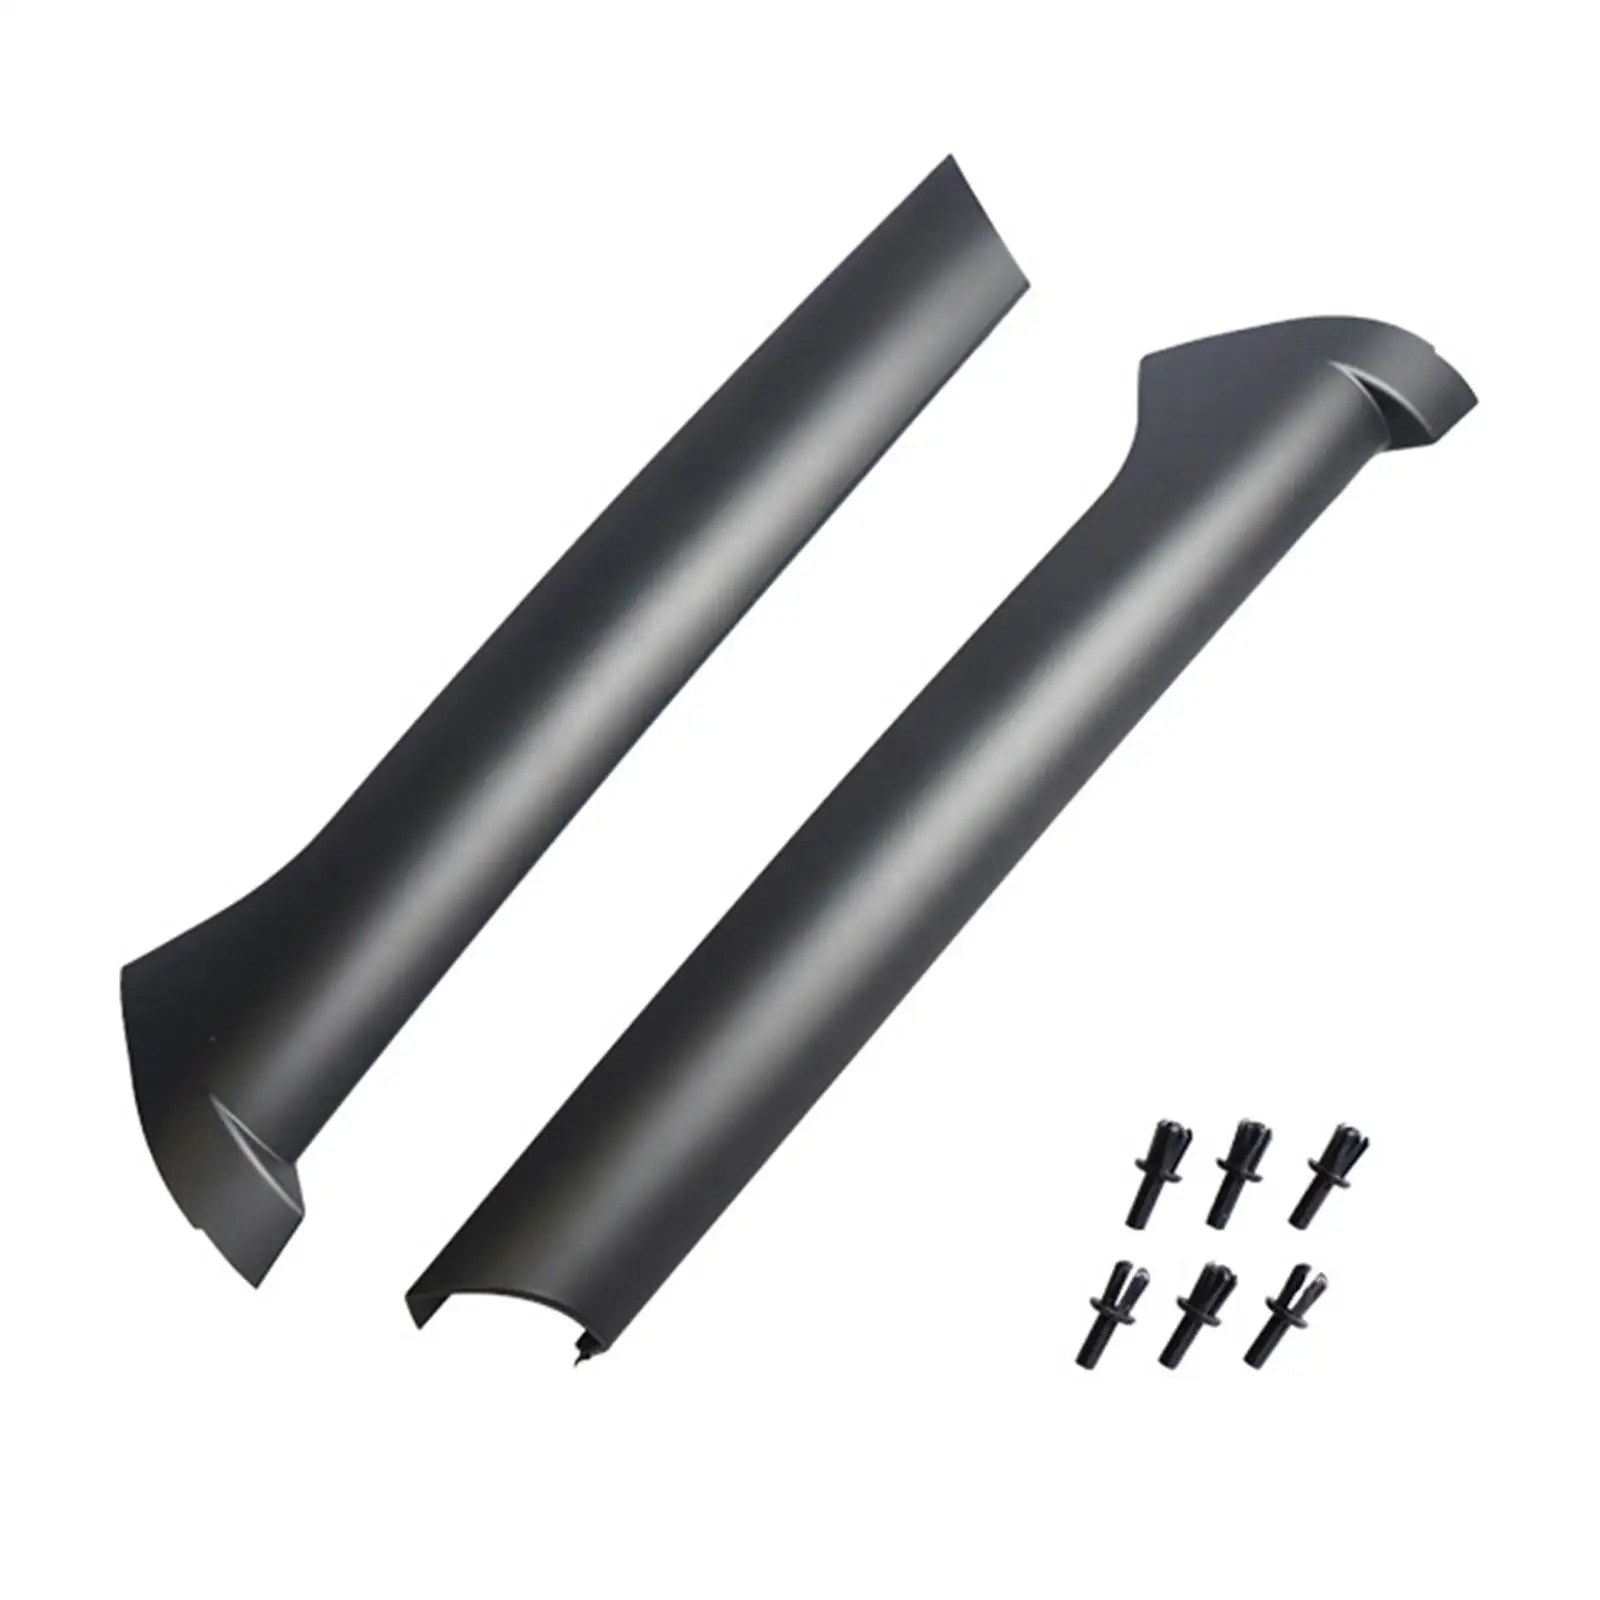 Windscreen Pillar Moldings and Rivets Dcb500070pma Dcb500060pma Left Right Easily Install Vehicle for Land Rover 1999-2004